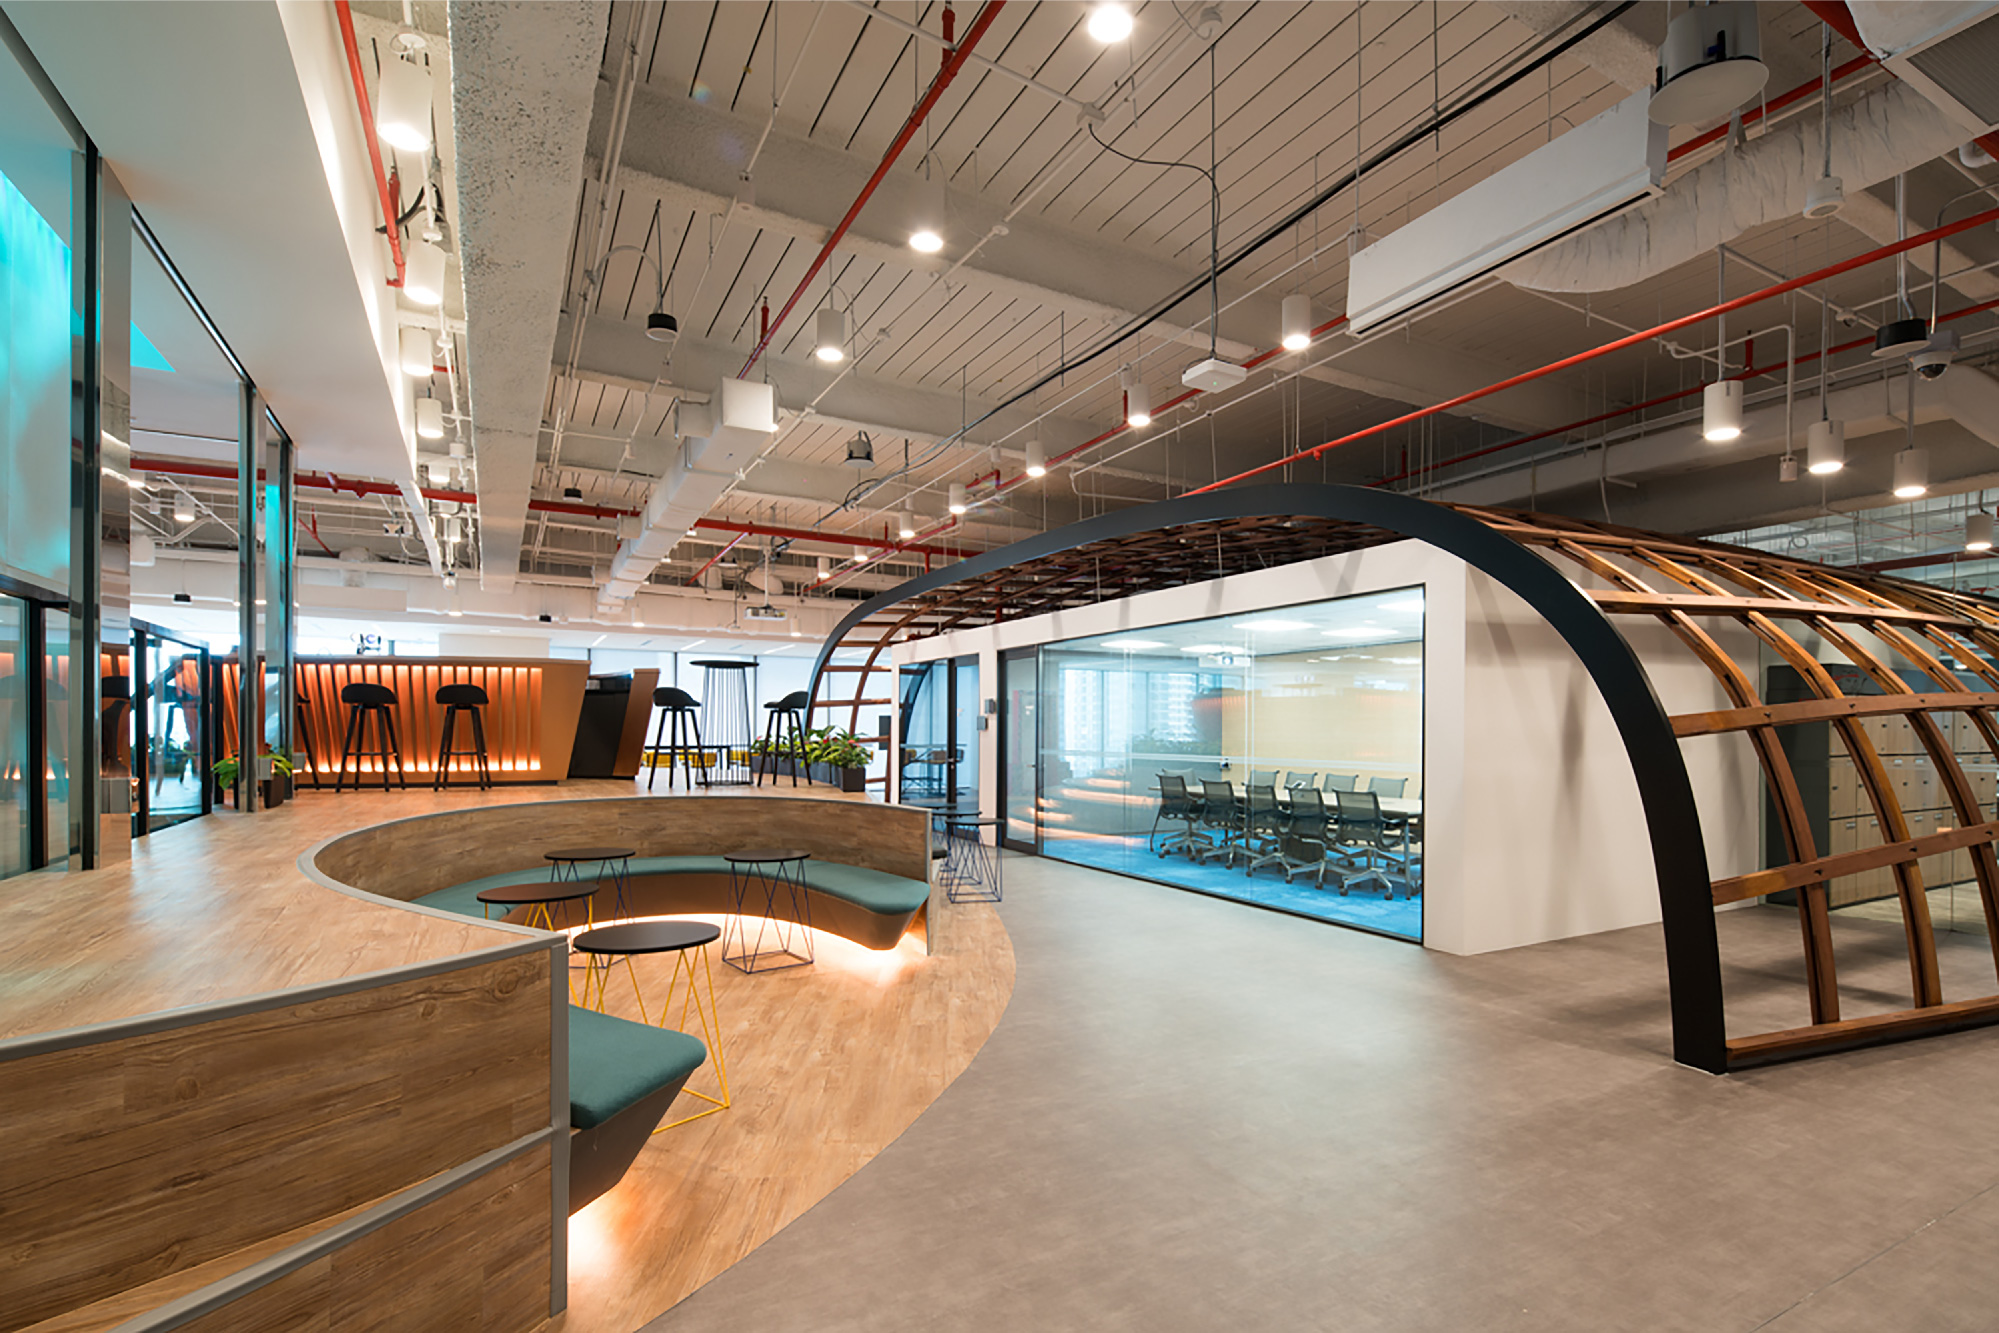 Prudential office in Singapore showcasing an agile office space design